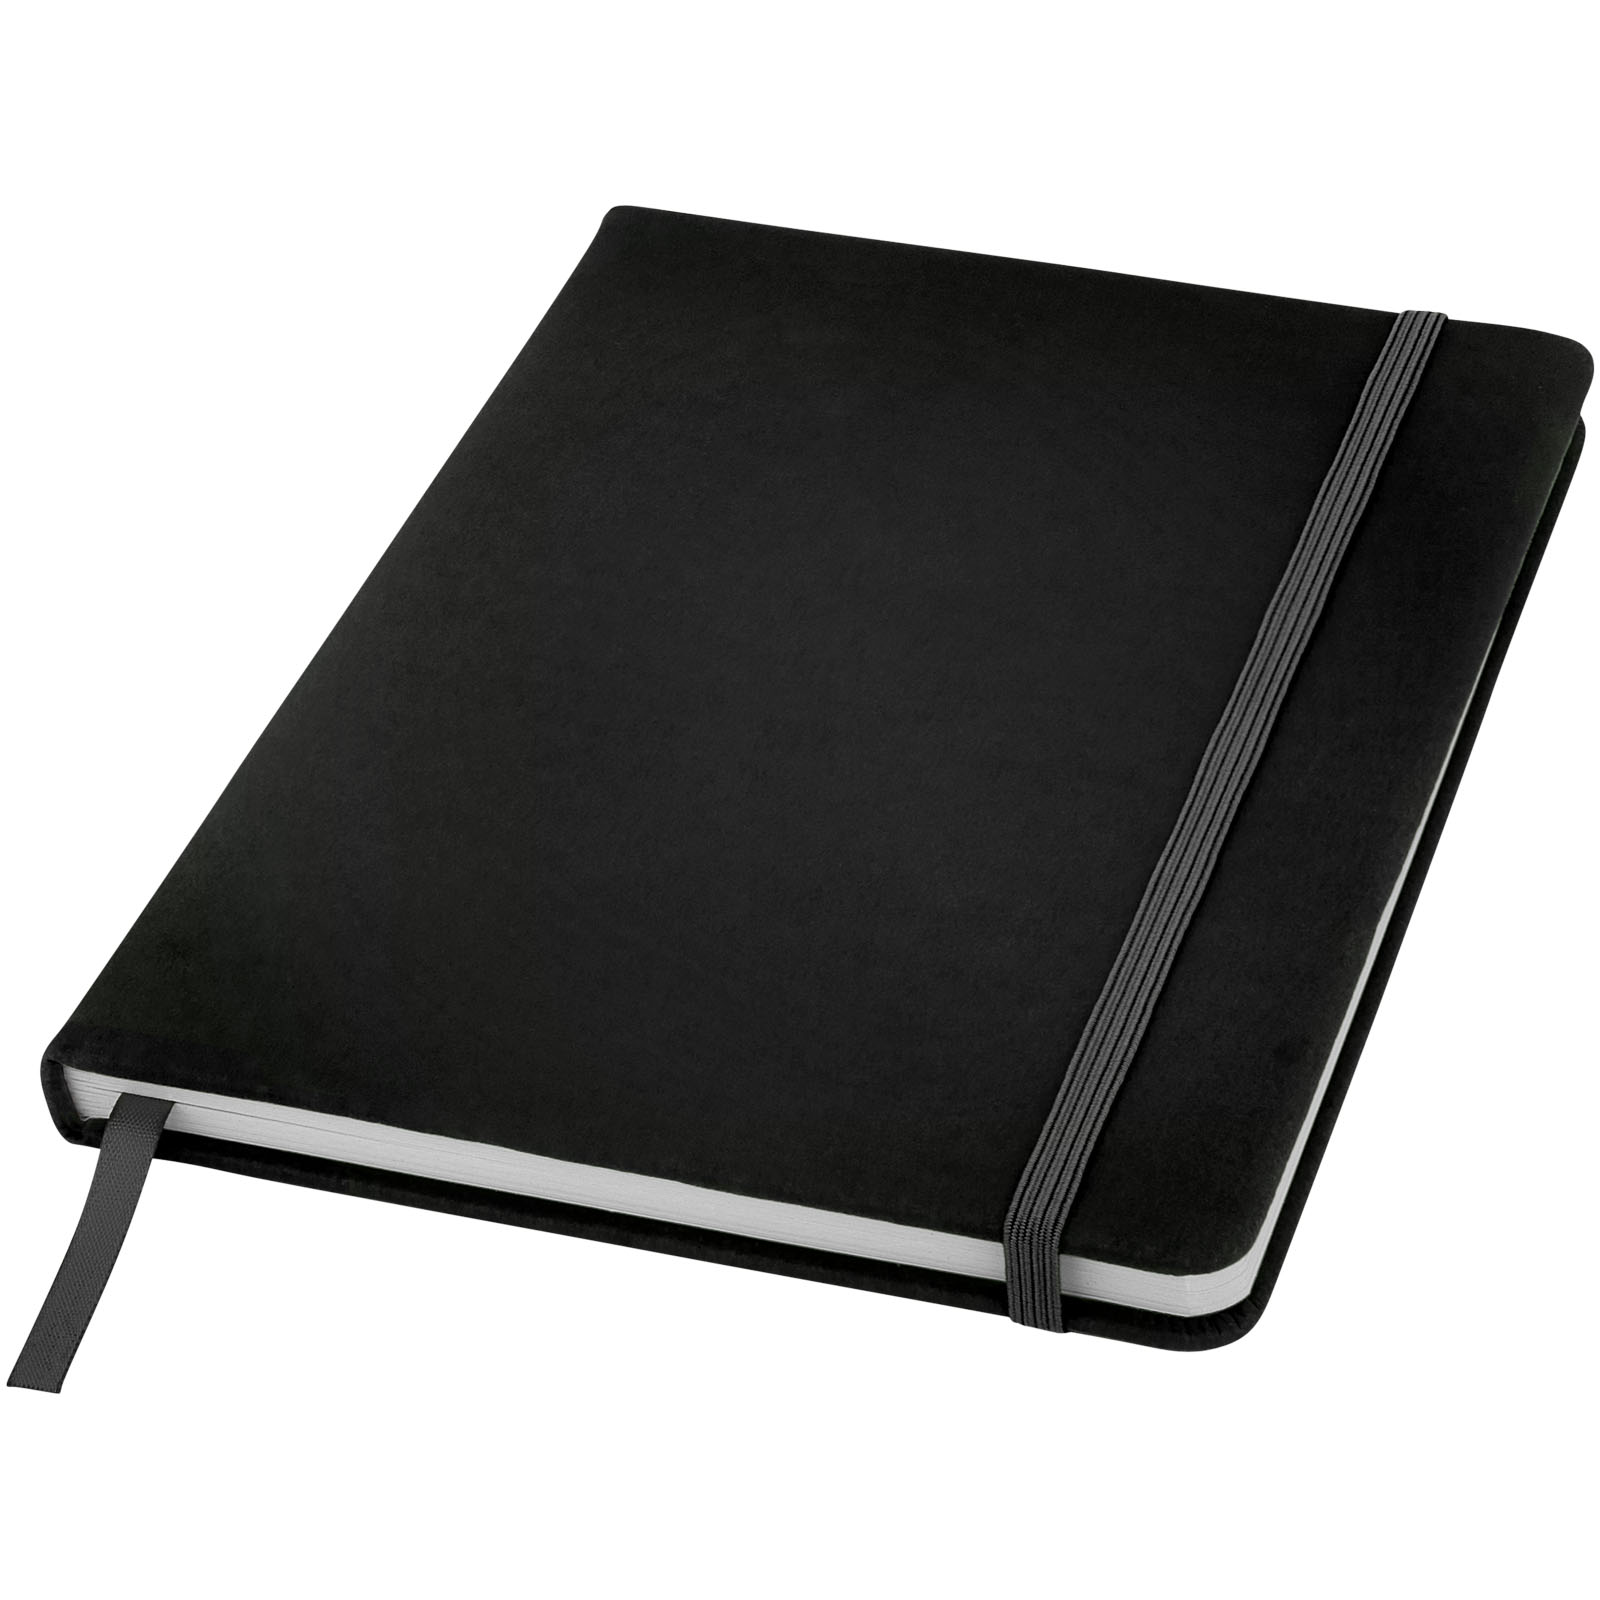 Advertising Hard cover notebooks - Spectrum A5 notebook with dotted pages